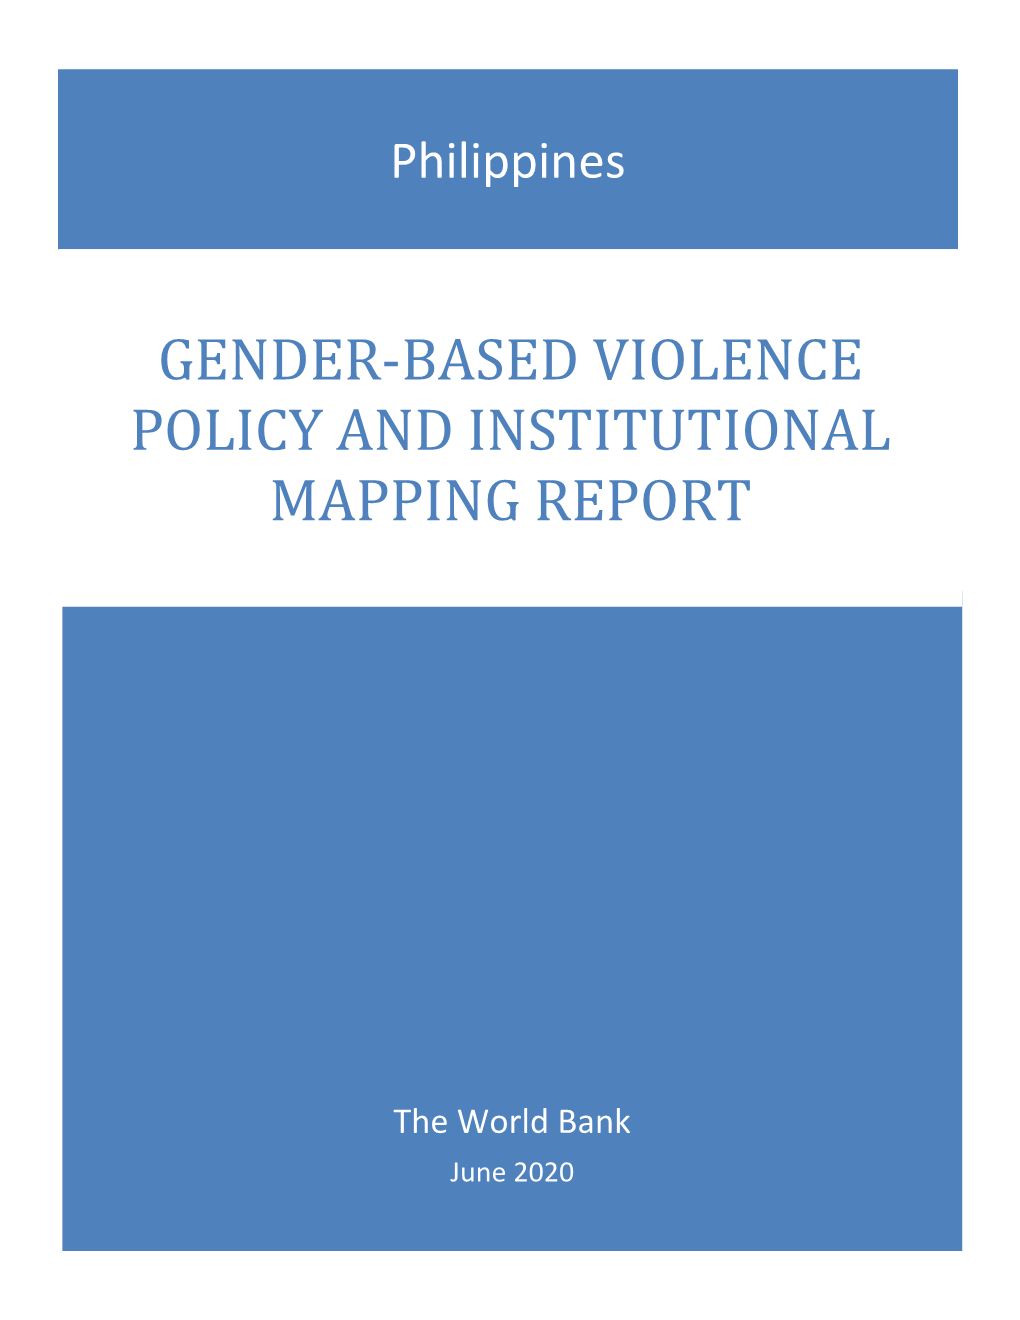 Gender-Based Violence Policy and Institutional Mapping Report